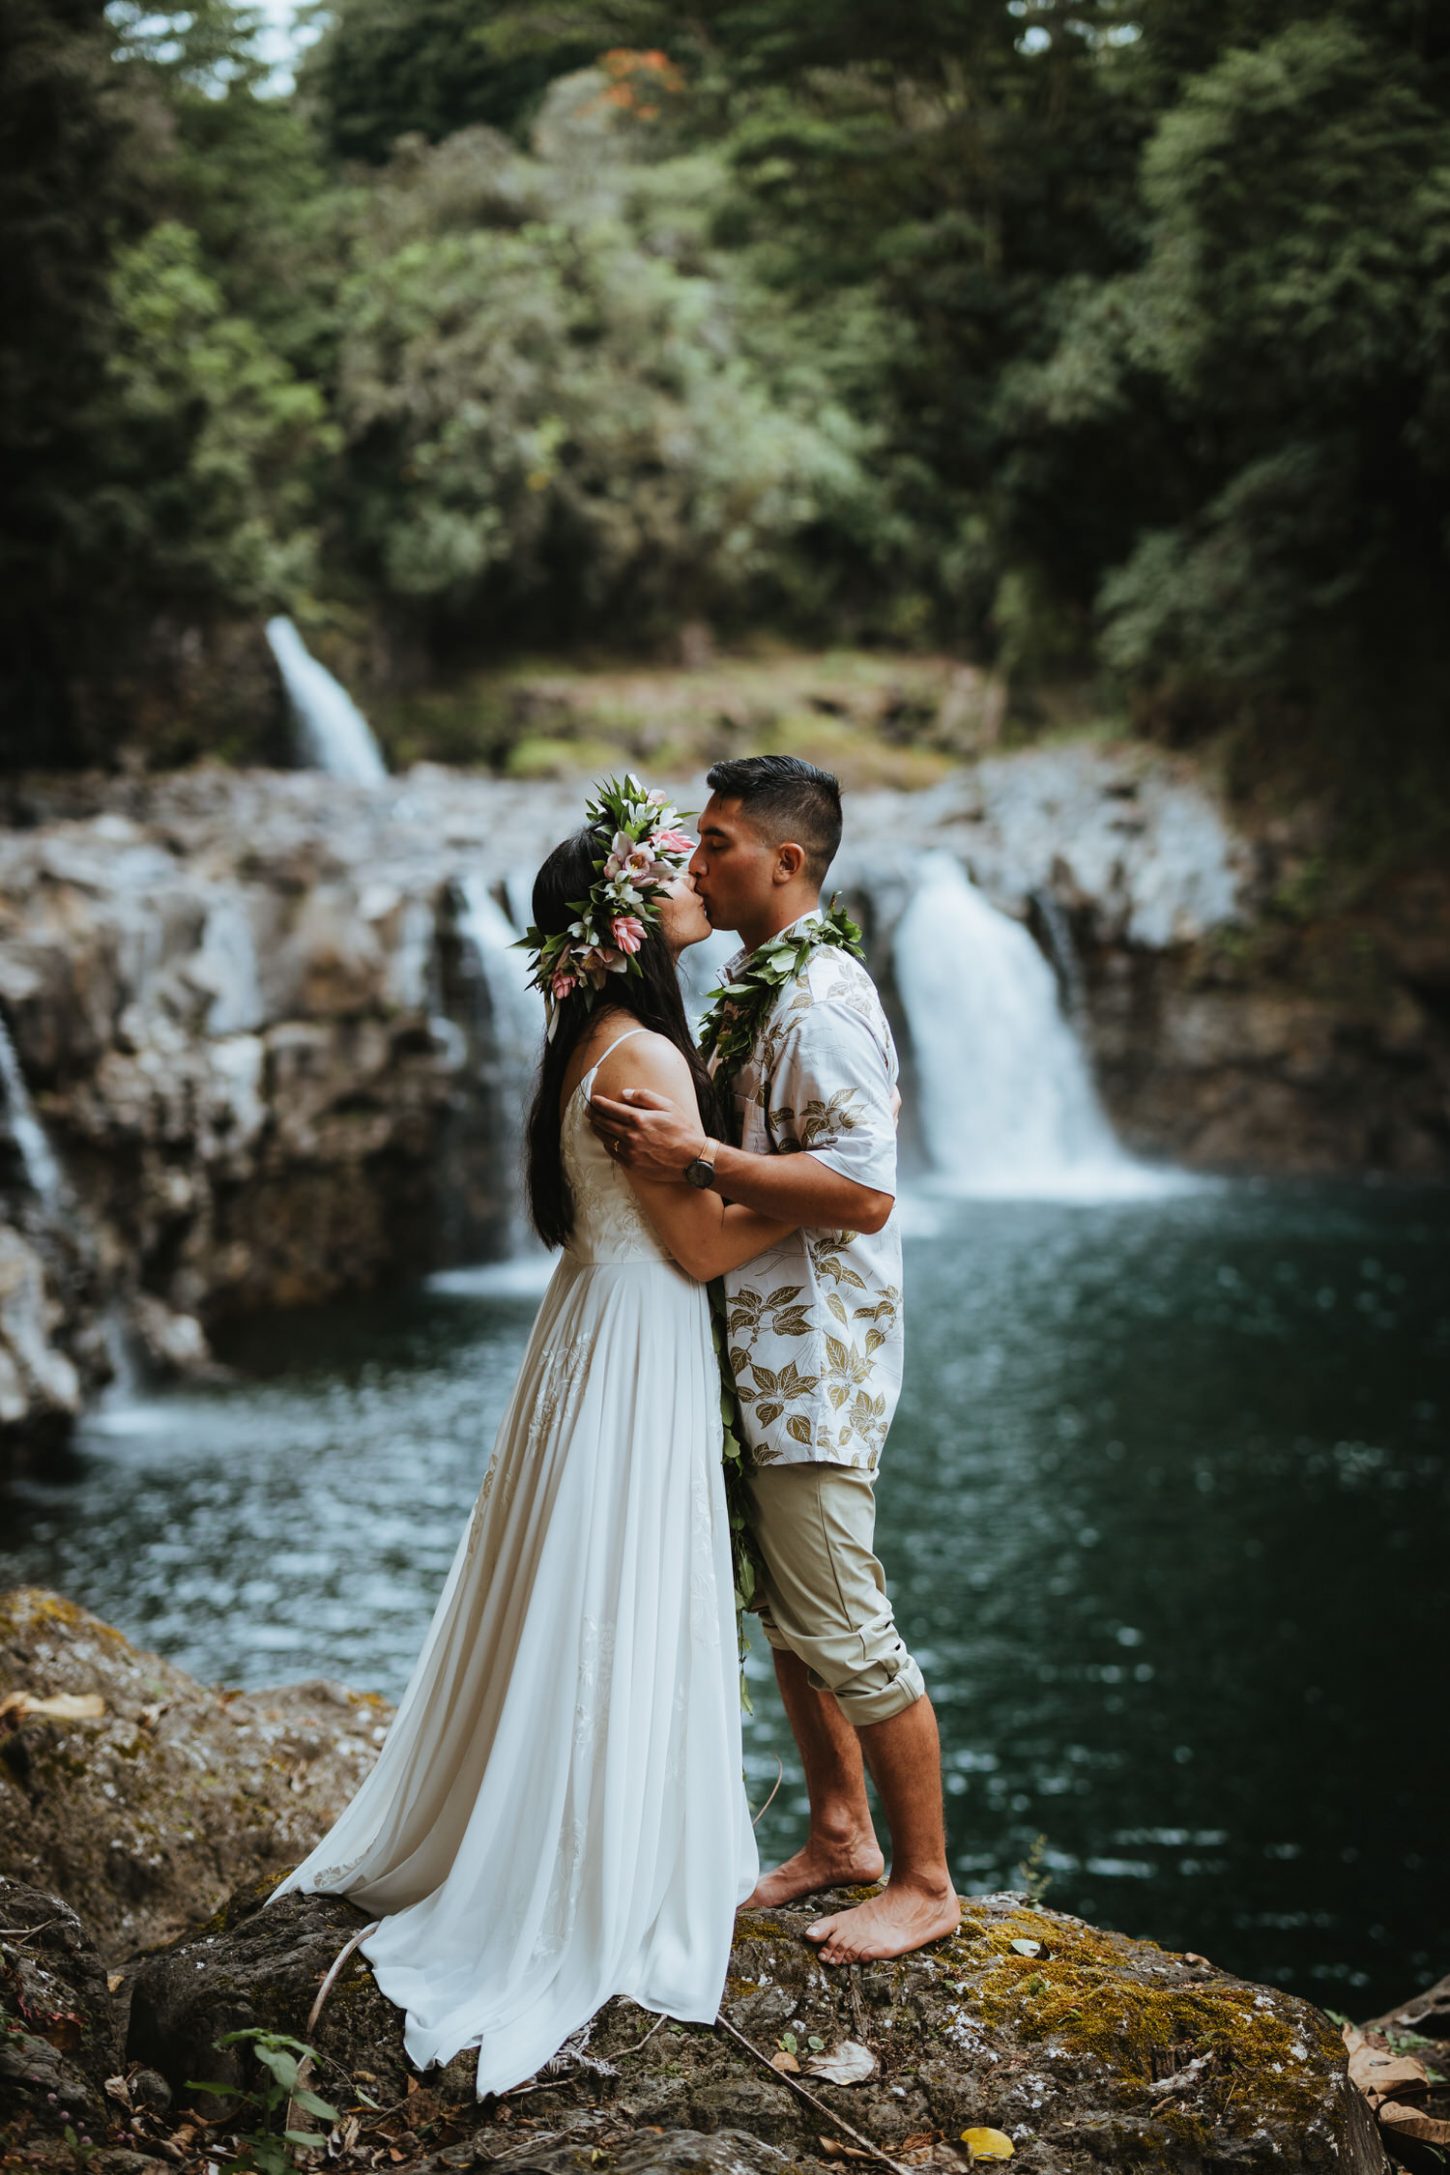 Hawaii Elopement Packages for Your Wedding